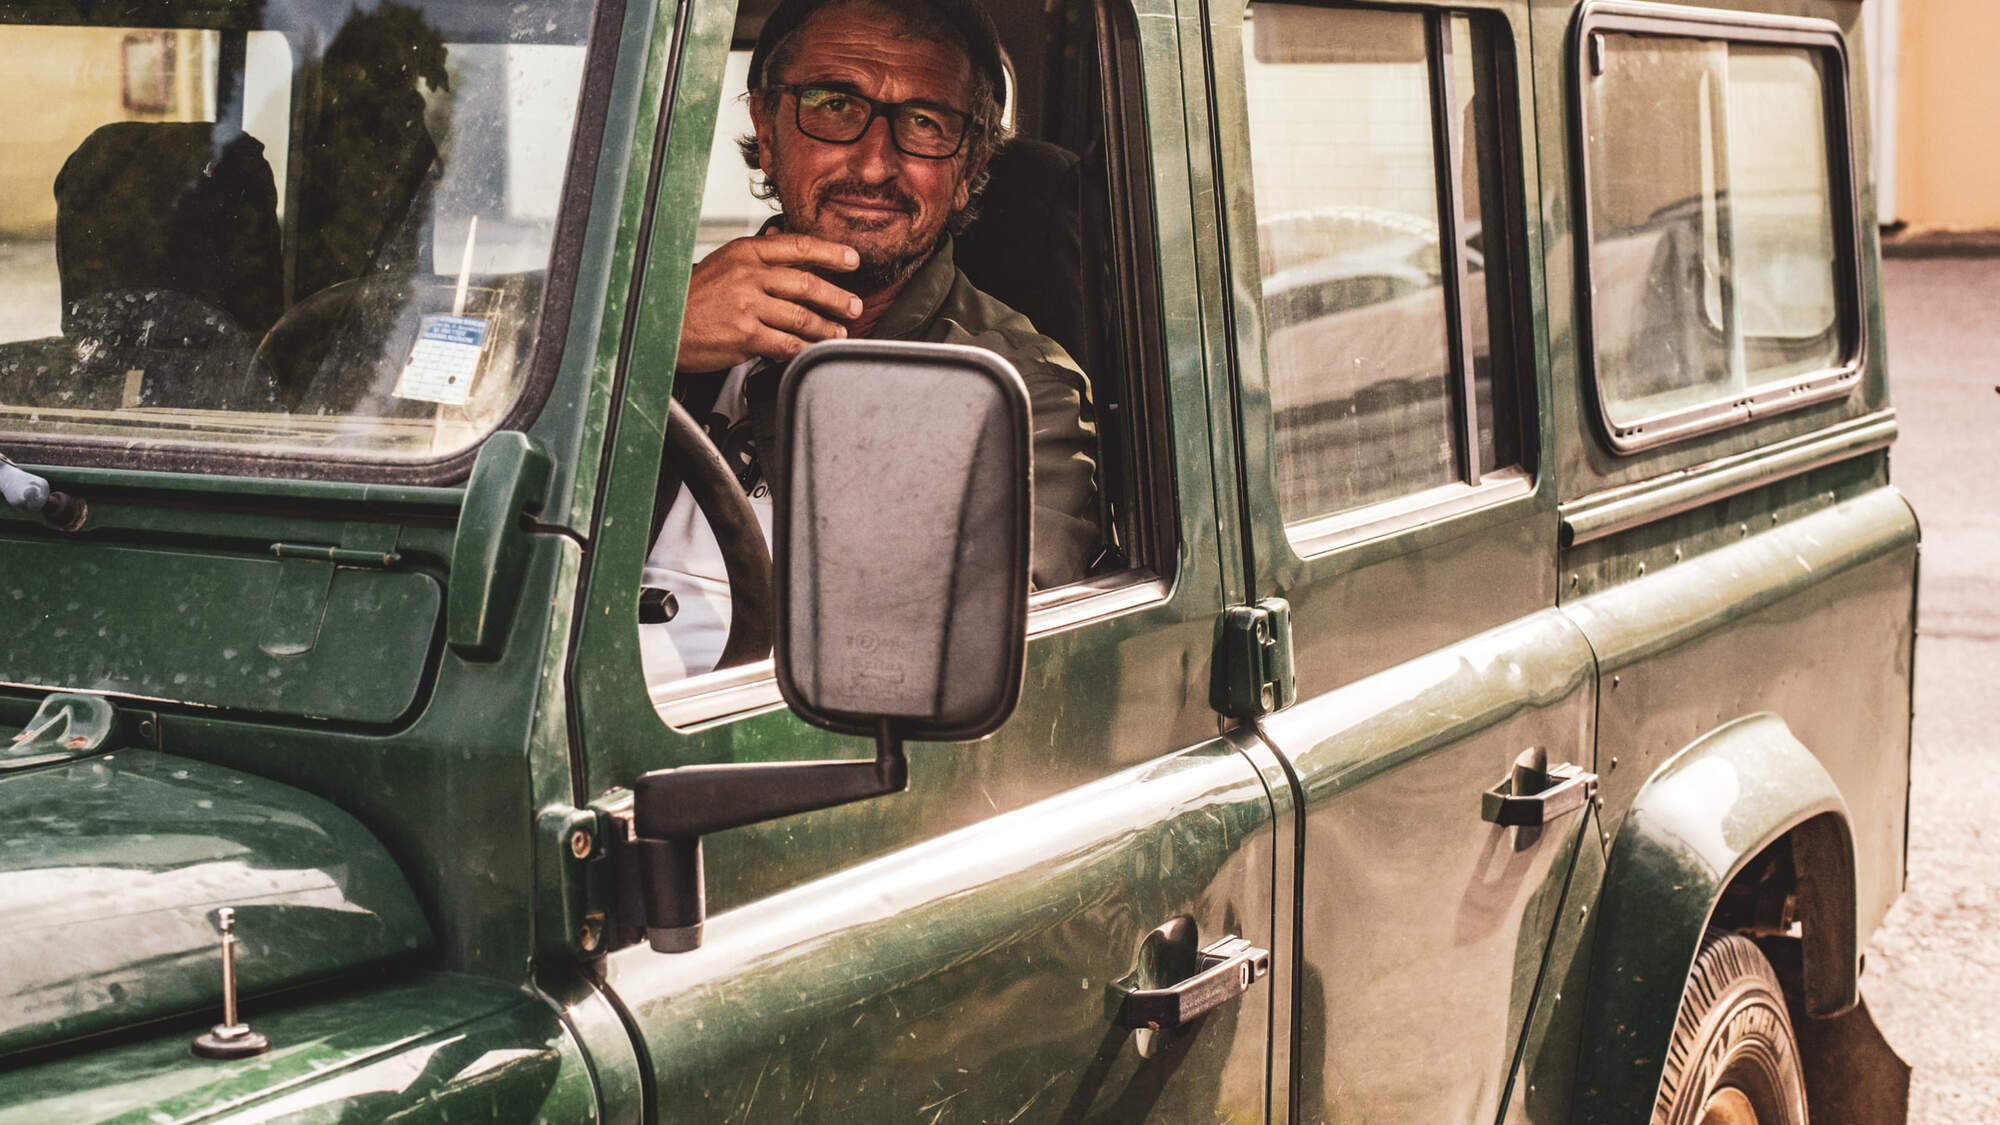 Man wearing glasses sitting in a jeep, looking out of the drivers seat window.